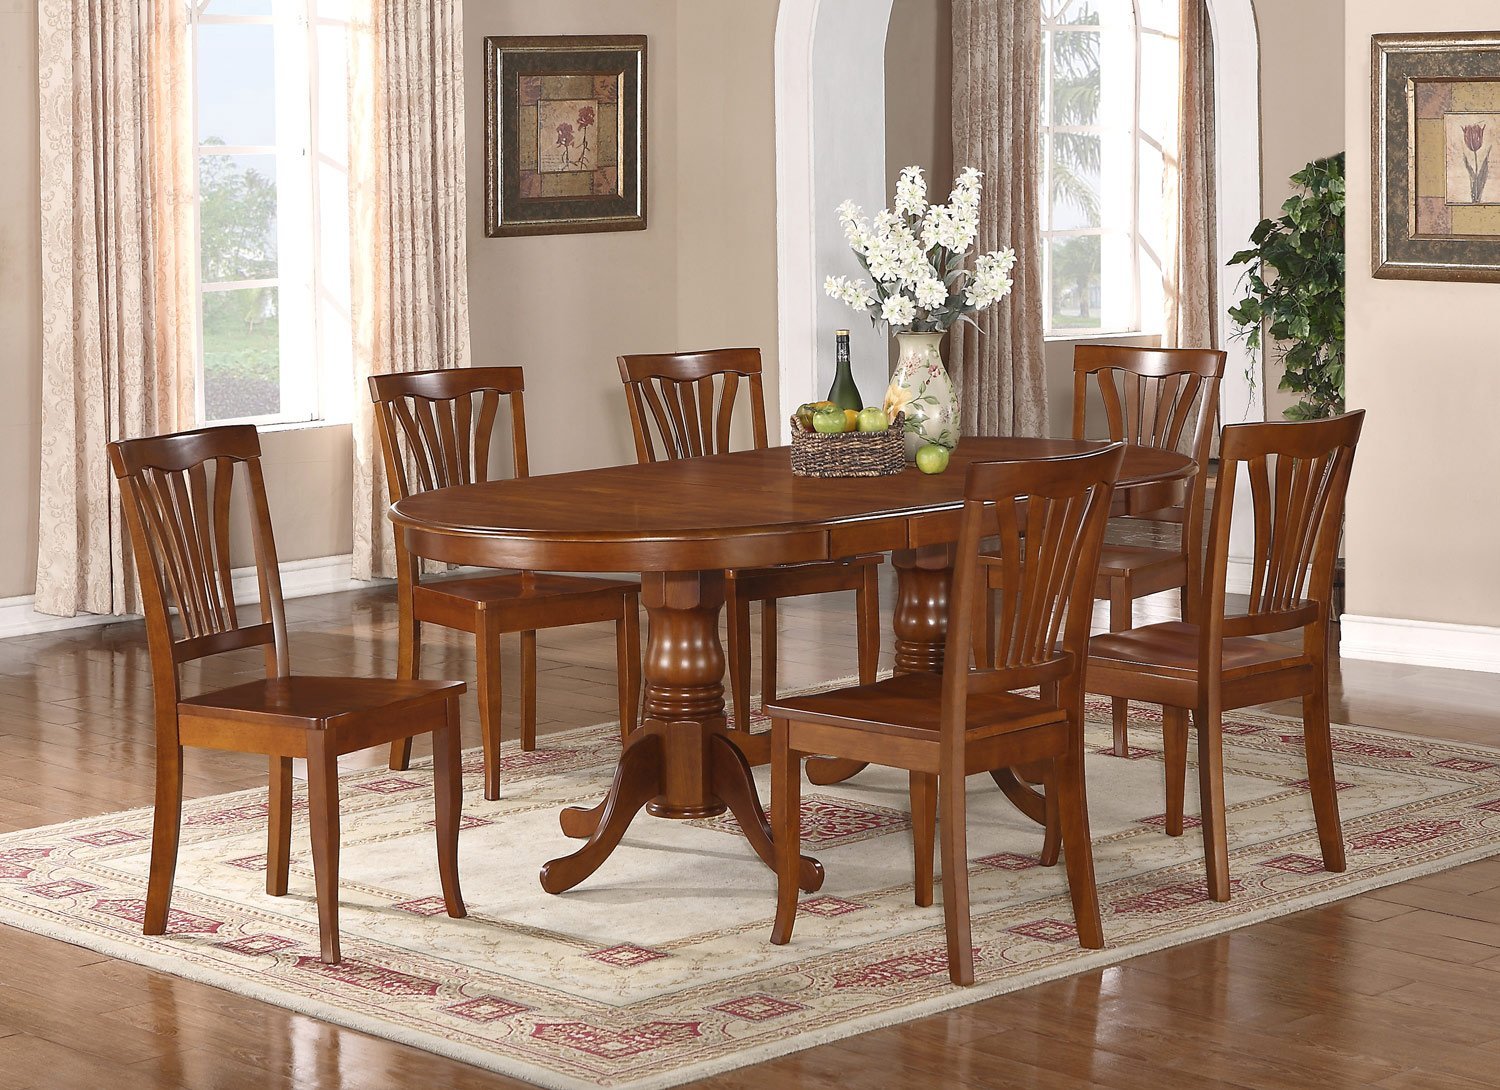 9-PC Newton Oval Dining Room Set Table + 8 Wood Seat Chairs in Saddle